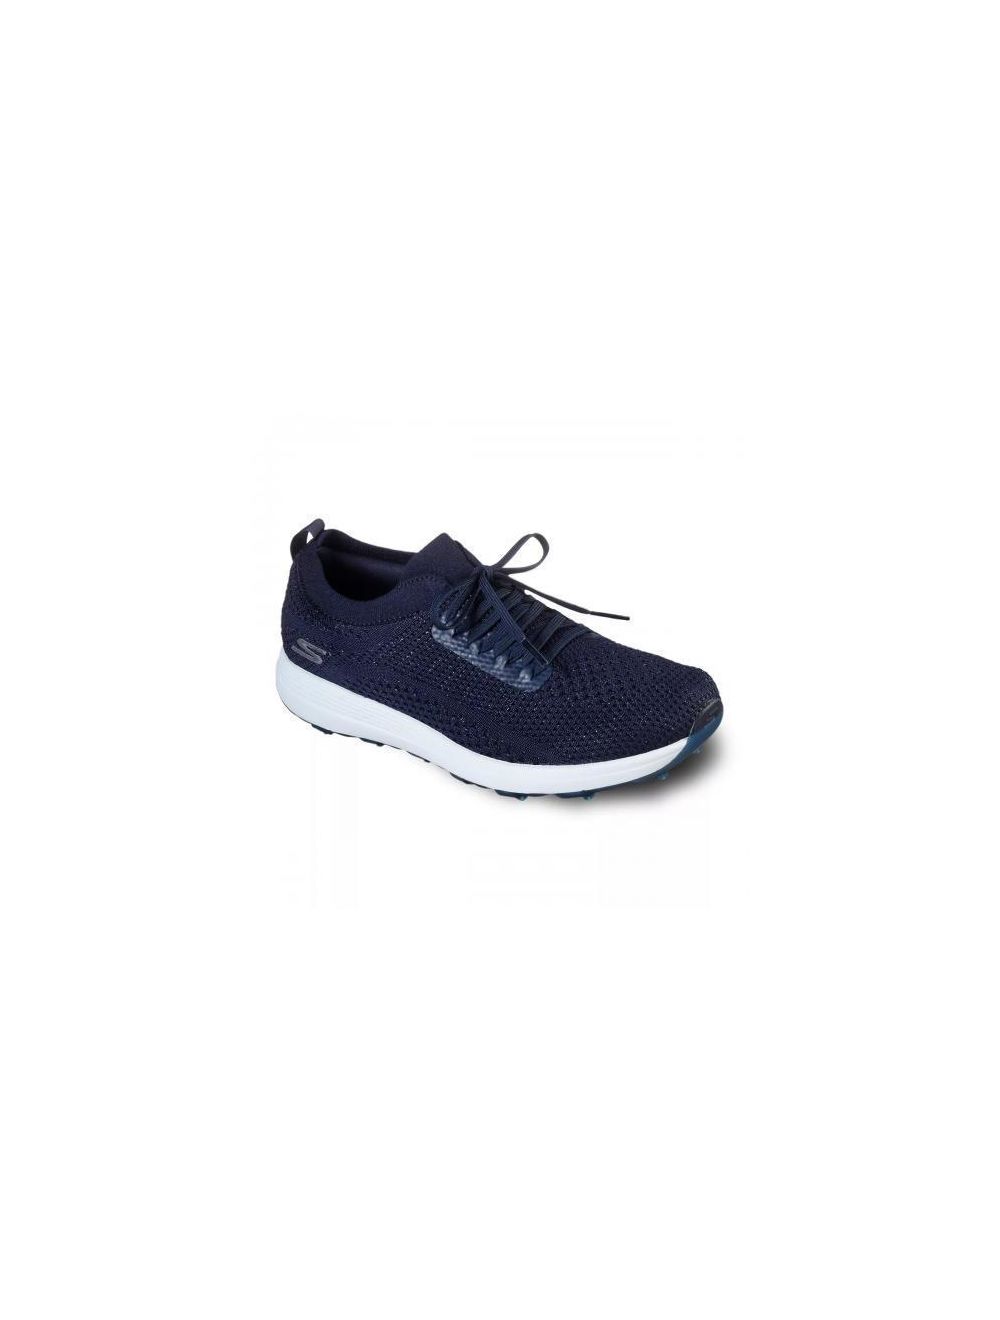 SKECHERS GO GOLF MAX SHOES - 17005